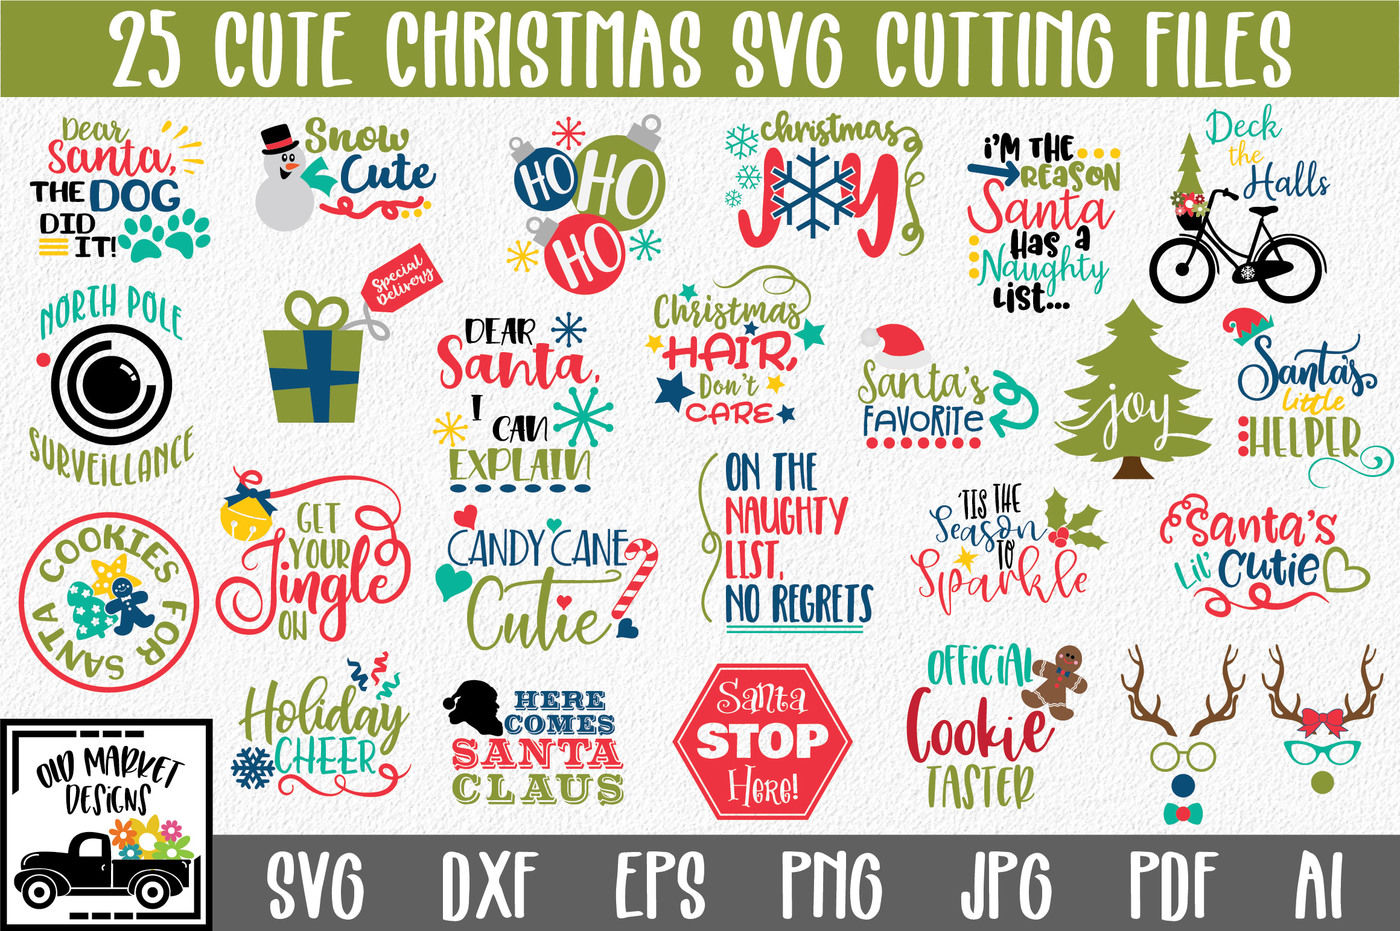 Cute Christmas SVG Bundle with 25 Christmas SVG Cut Files - DXF - EPS